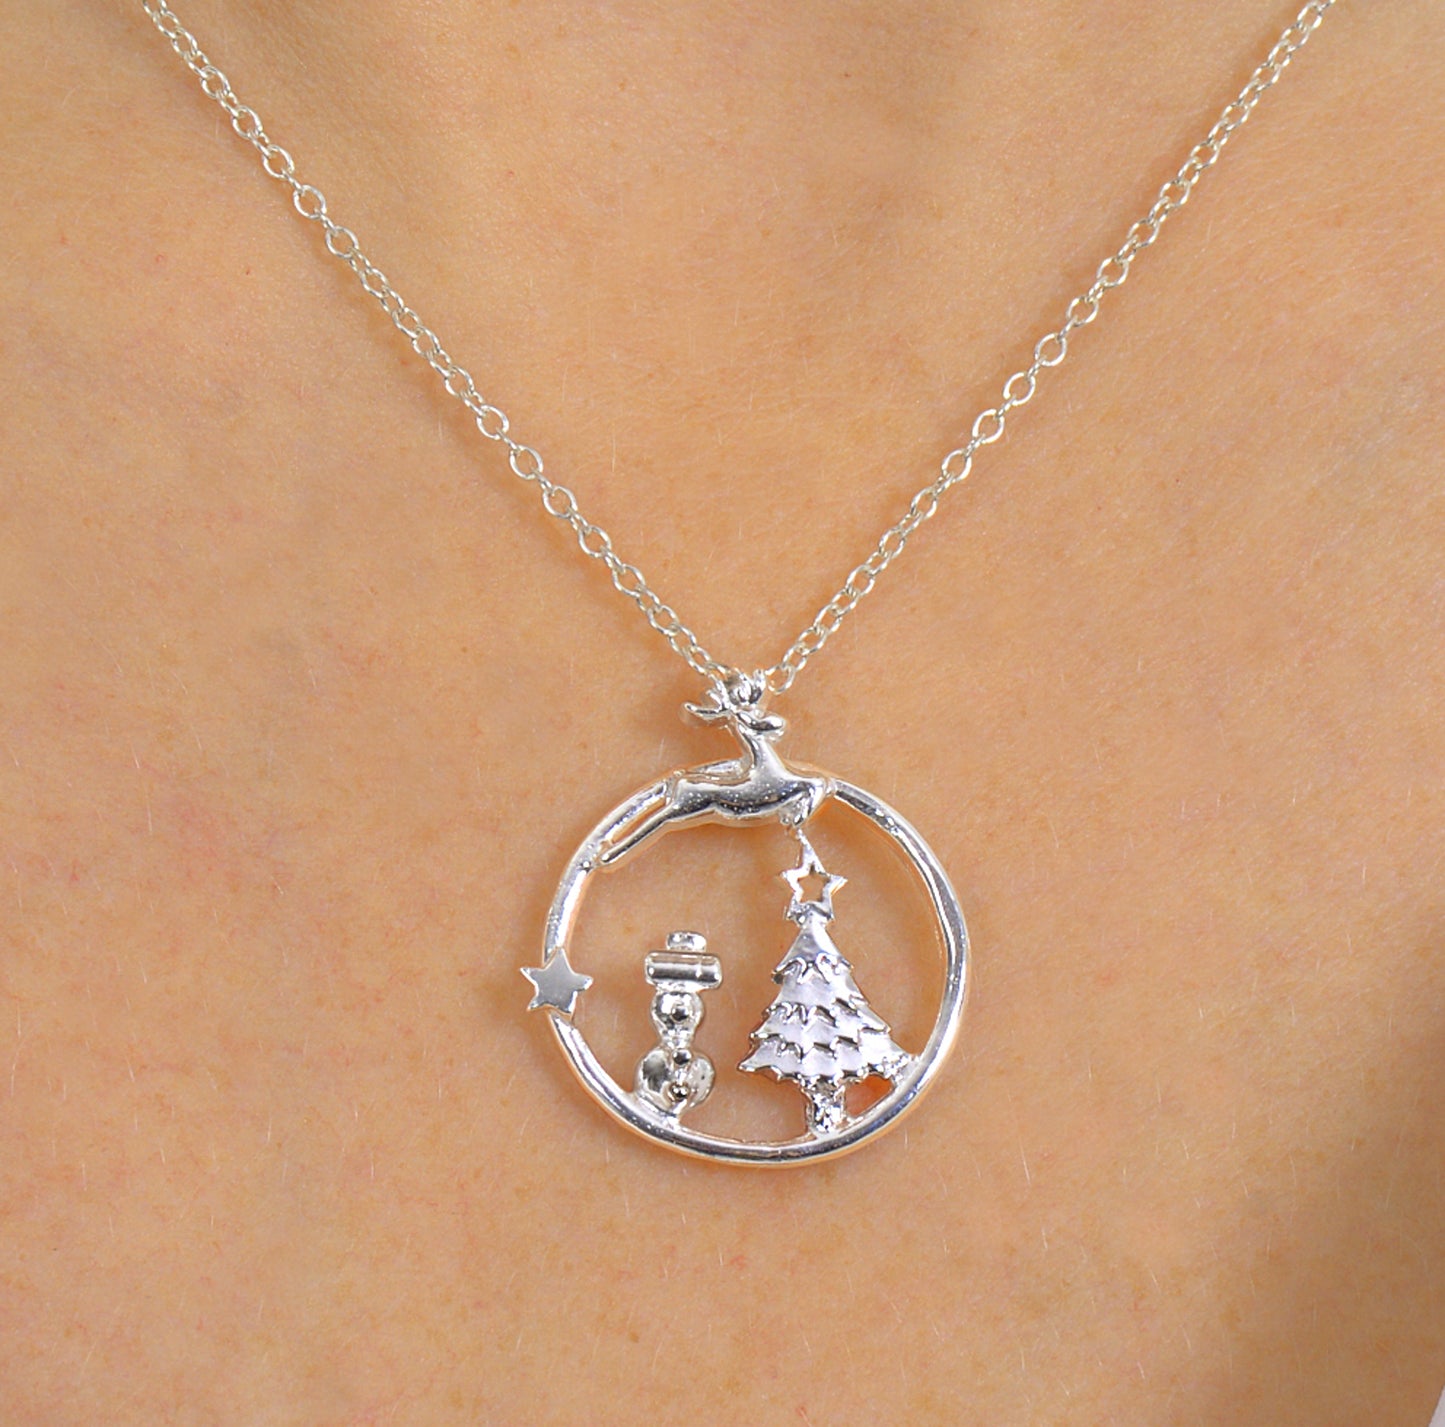 Wonderland Sterling Silver Christmas Charm Necklace